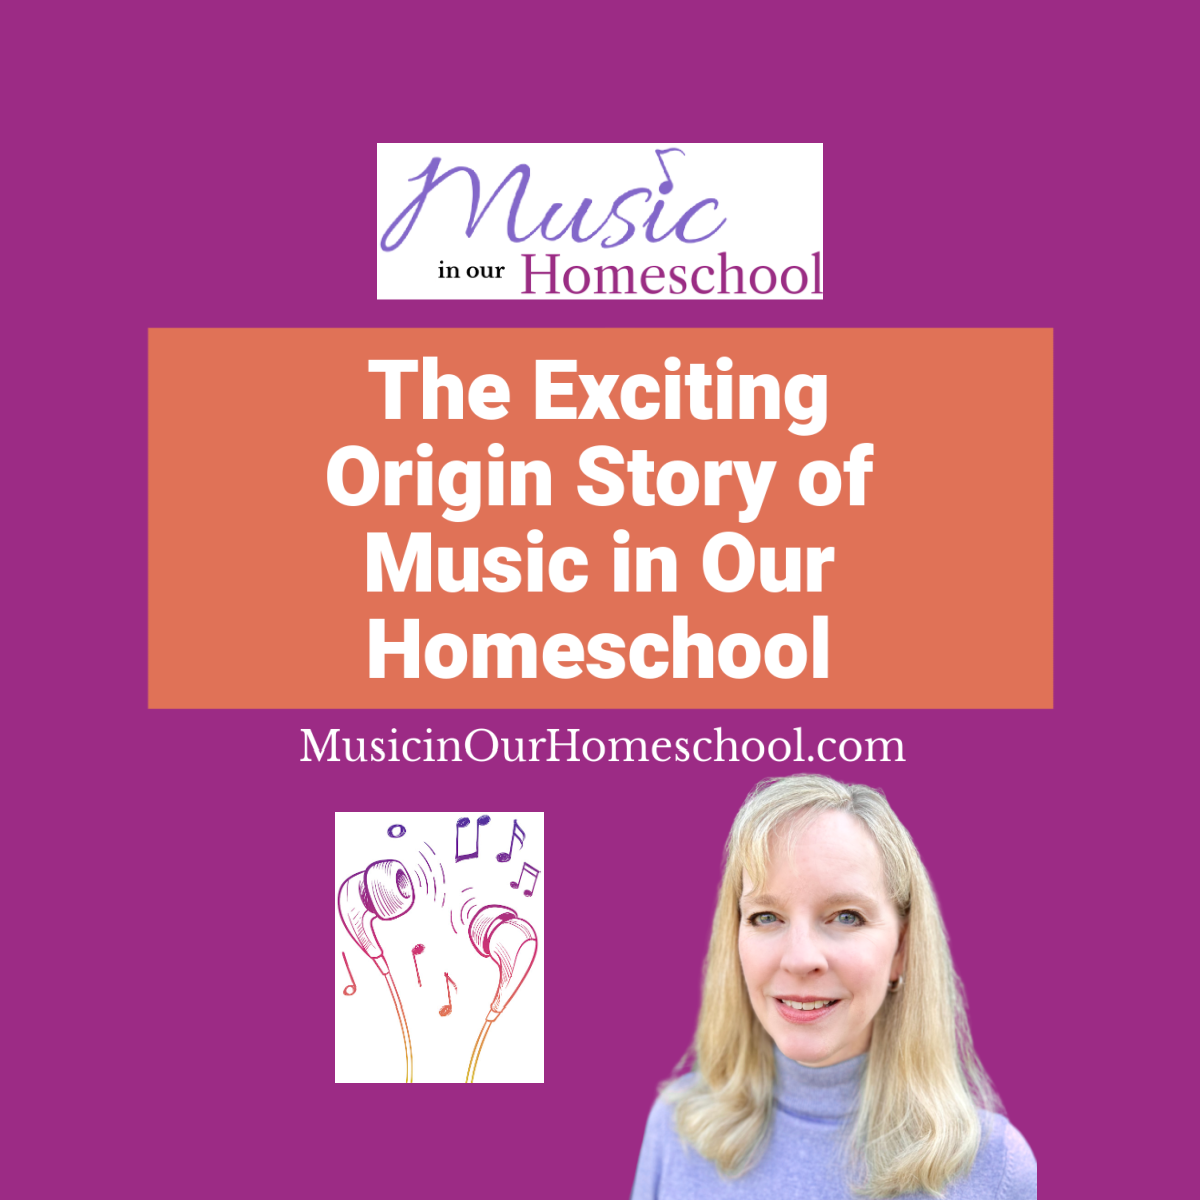 The exciting origin story of Music in Our Homeschool